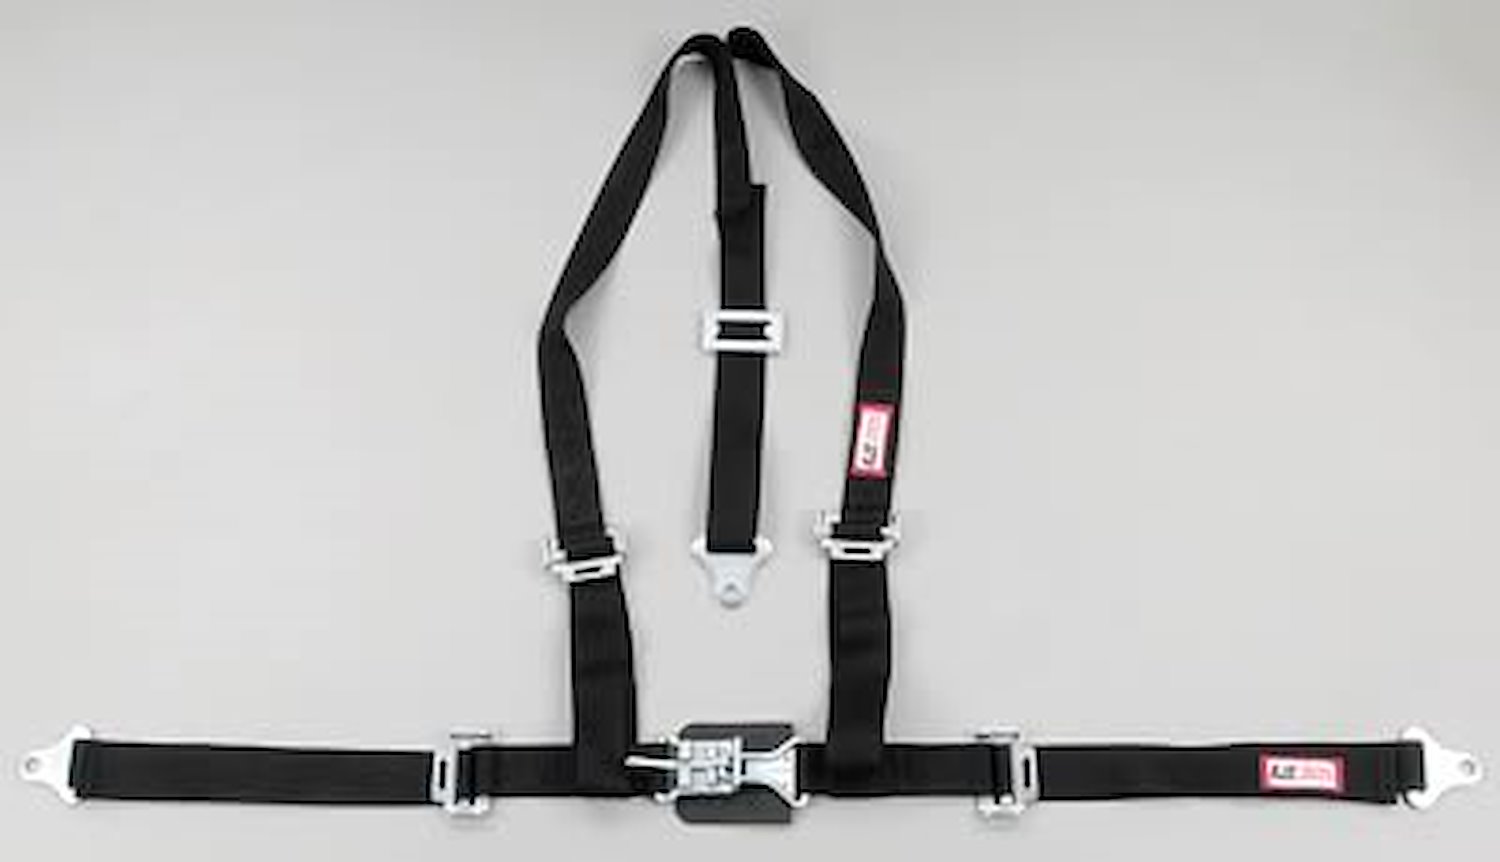 NON-SFI L&L HARNESS 2 PULL DOWN Lap Belt w/Adjuster 2 S.H. Y FLOOR Mount ALL WRAP ENDS BLUE